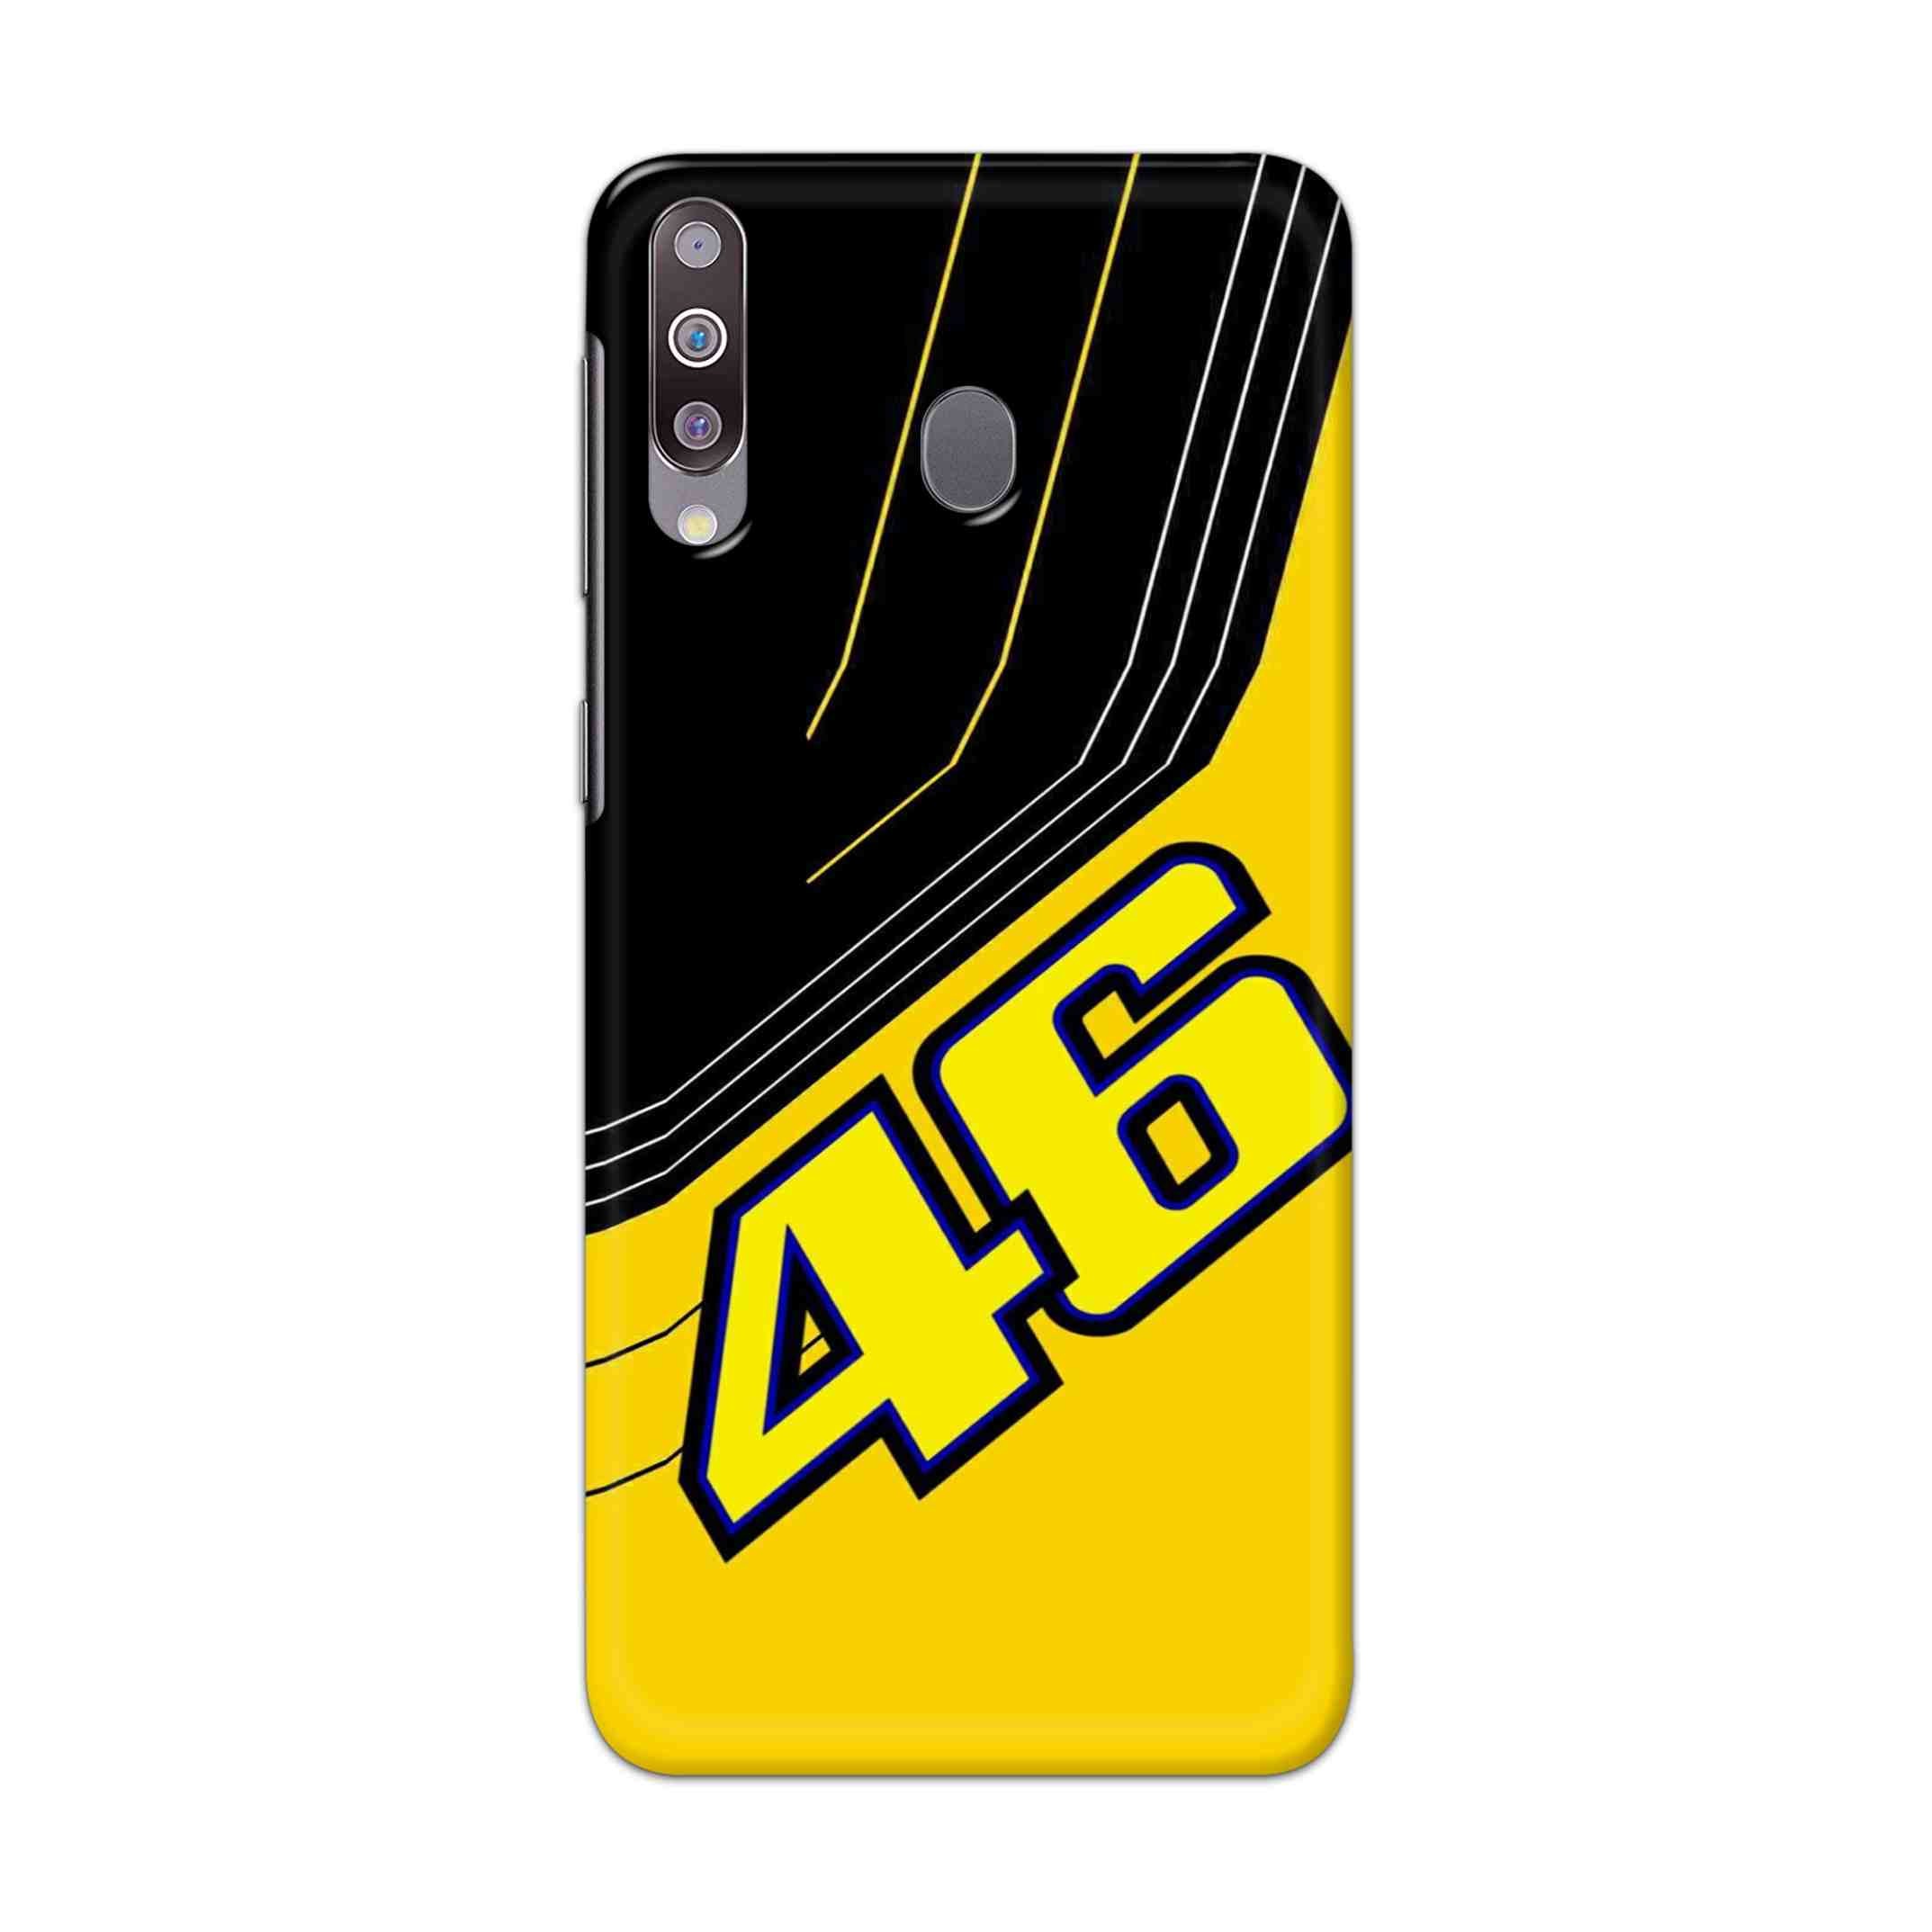 Buy 46 Hard Back Mobile Phone Case Cover For Samsung Galaxy M30 Online